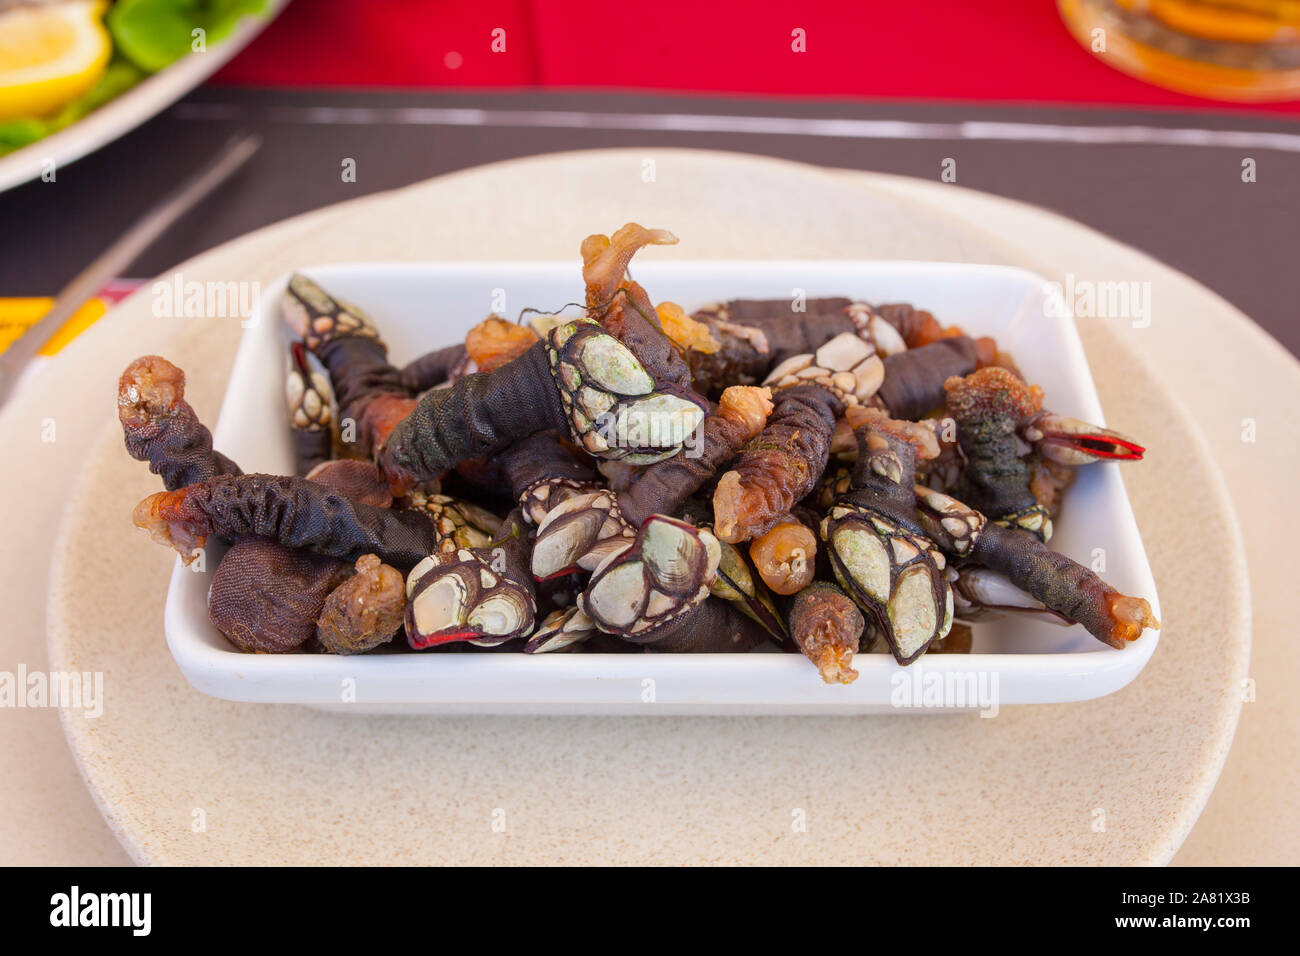 Goose neck barnacles platter at  portuguese seafood meal or marisqueira. Overhead shot Stock Photo